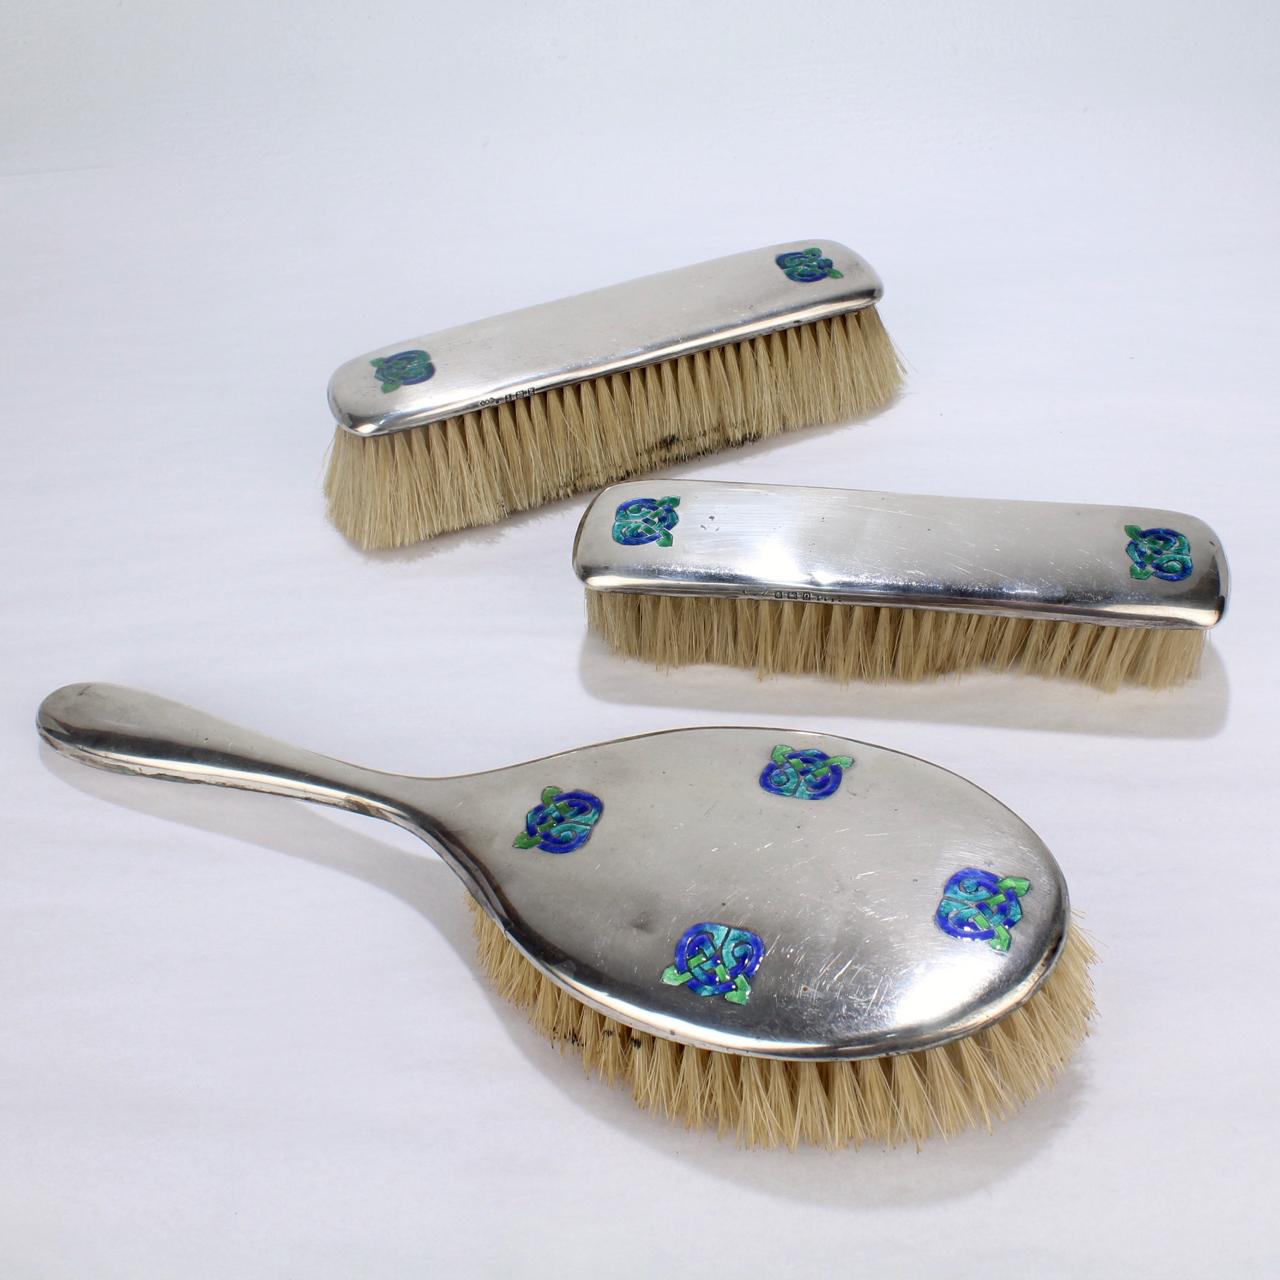 A wonderfully rare Art Nouveau Cymric pattern sterling silver partial dresser set including a hand mirror and three brushes.

The Cymric pattern was designed by Archibald Knox for Liberty and Co. and features green & blue enameled Celtic knot